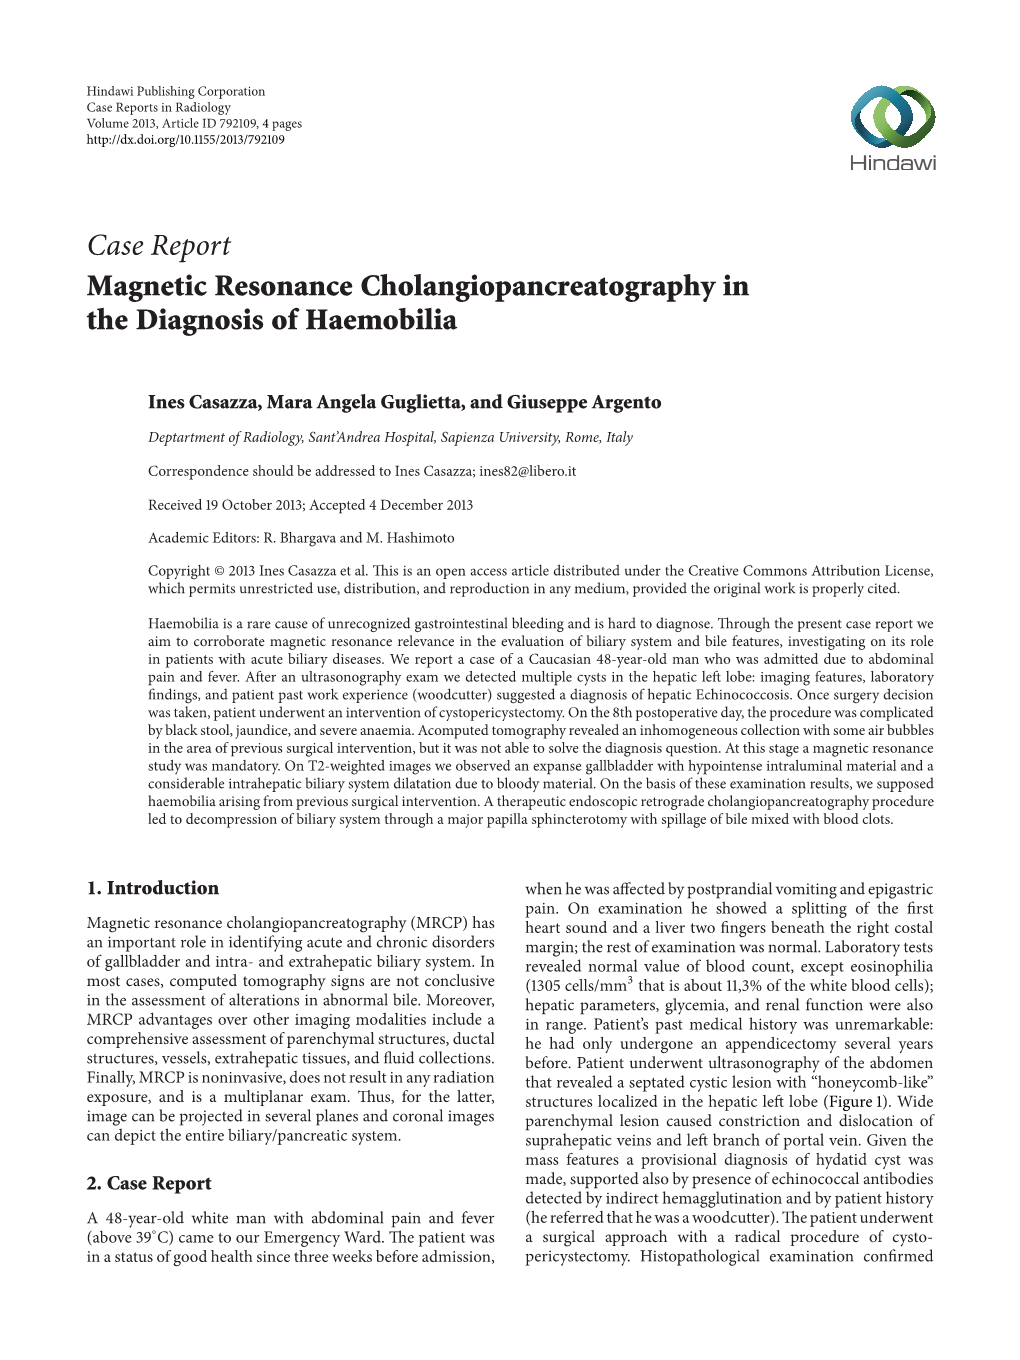 Magnetic Resonance Cholangiopancreatography in the Diagnosis of Haemobilia